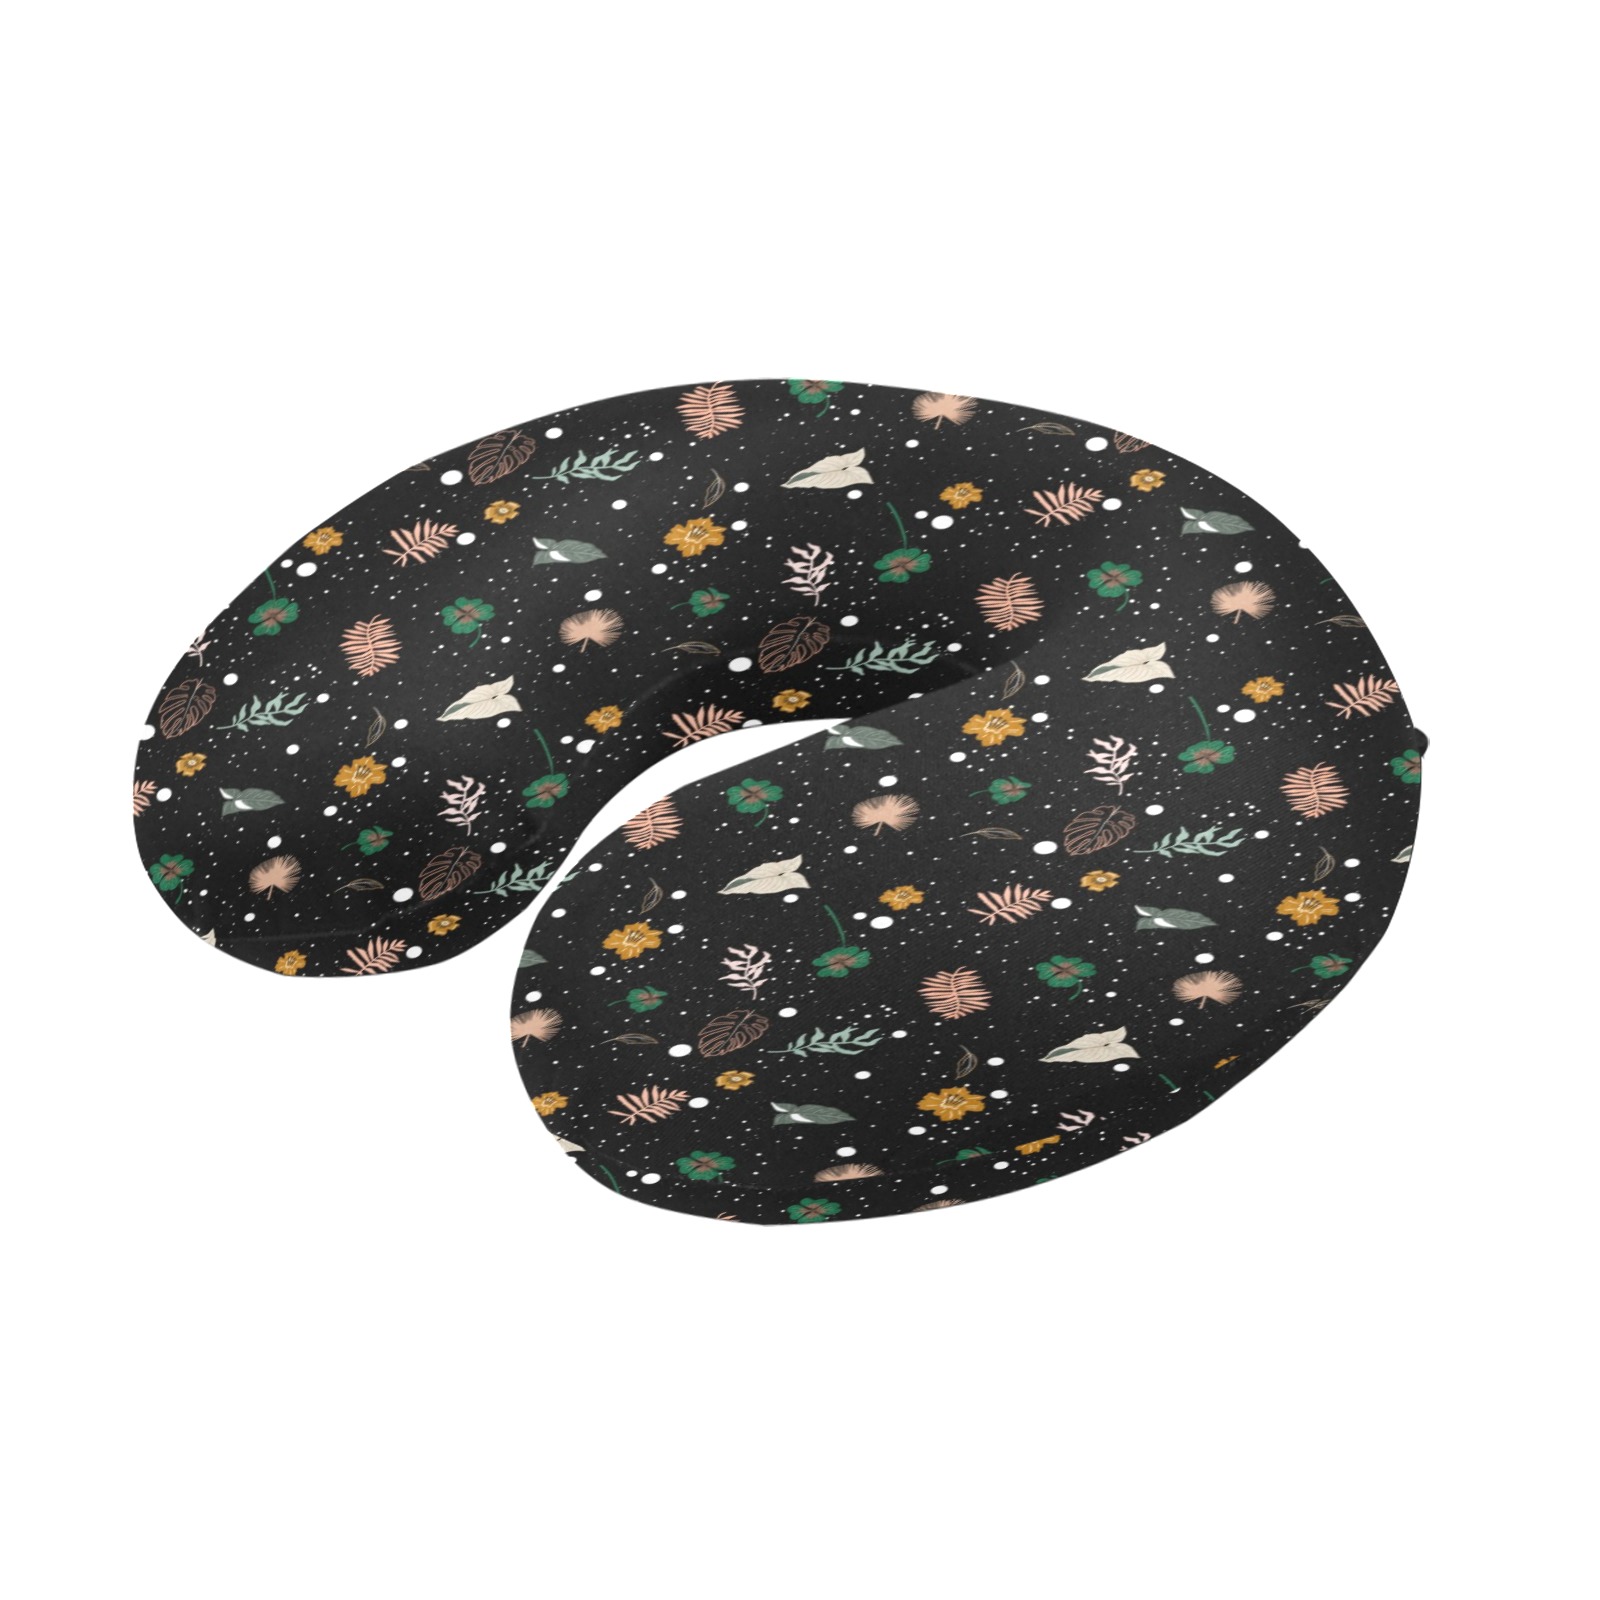 Lucky nature in space I U-Shape Travel Pillow